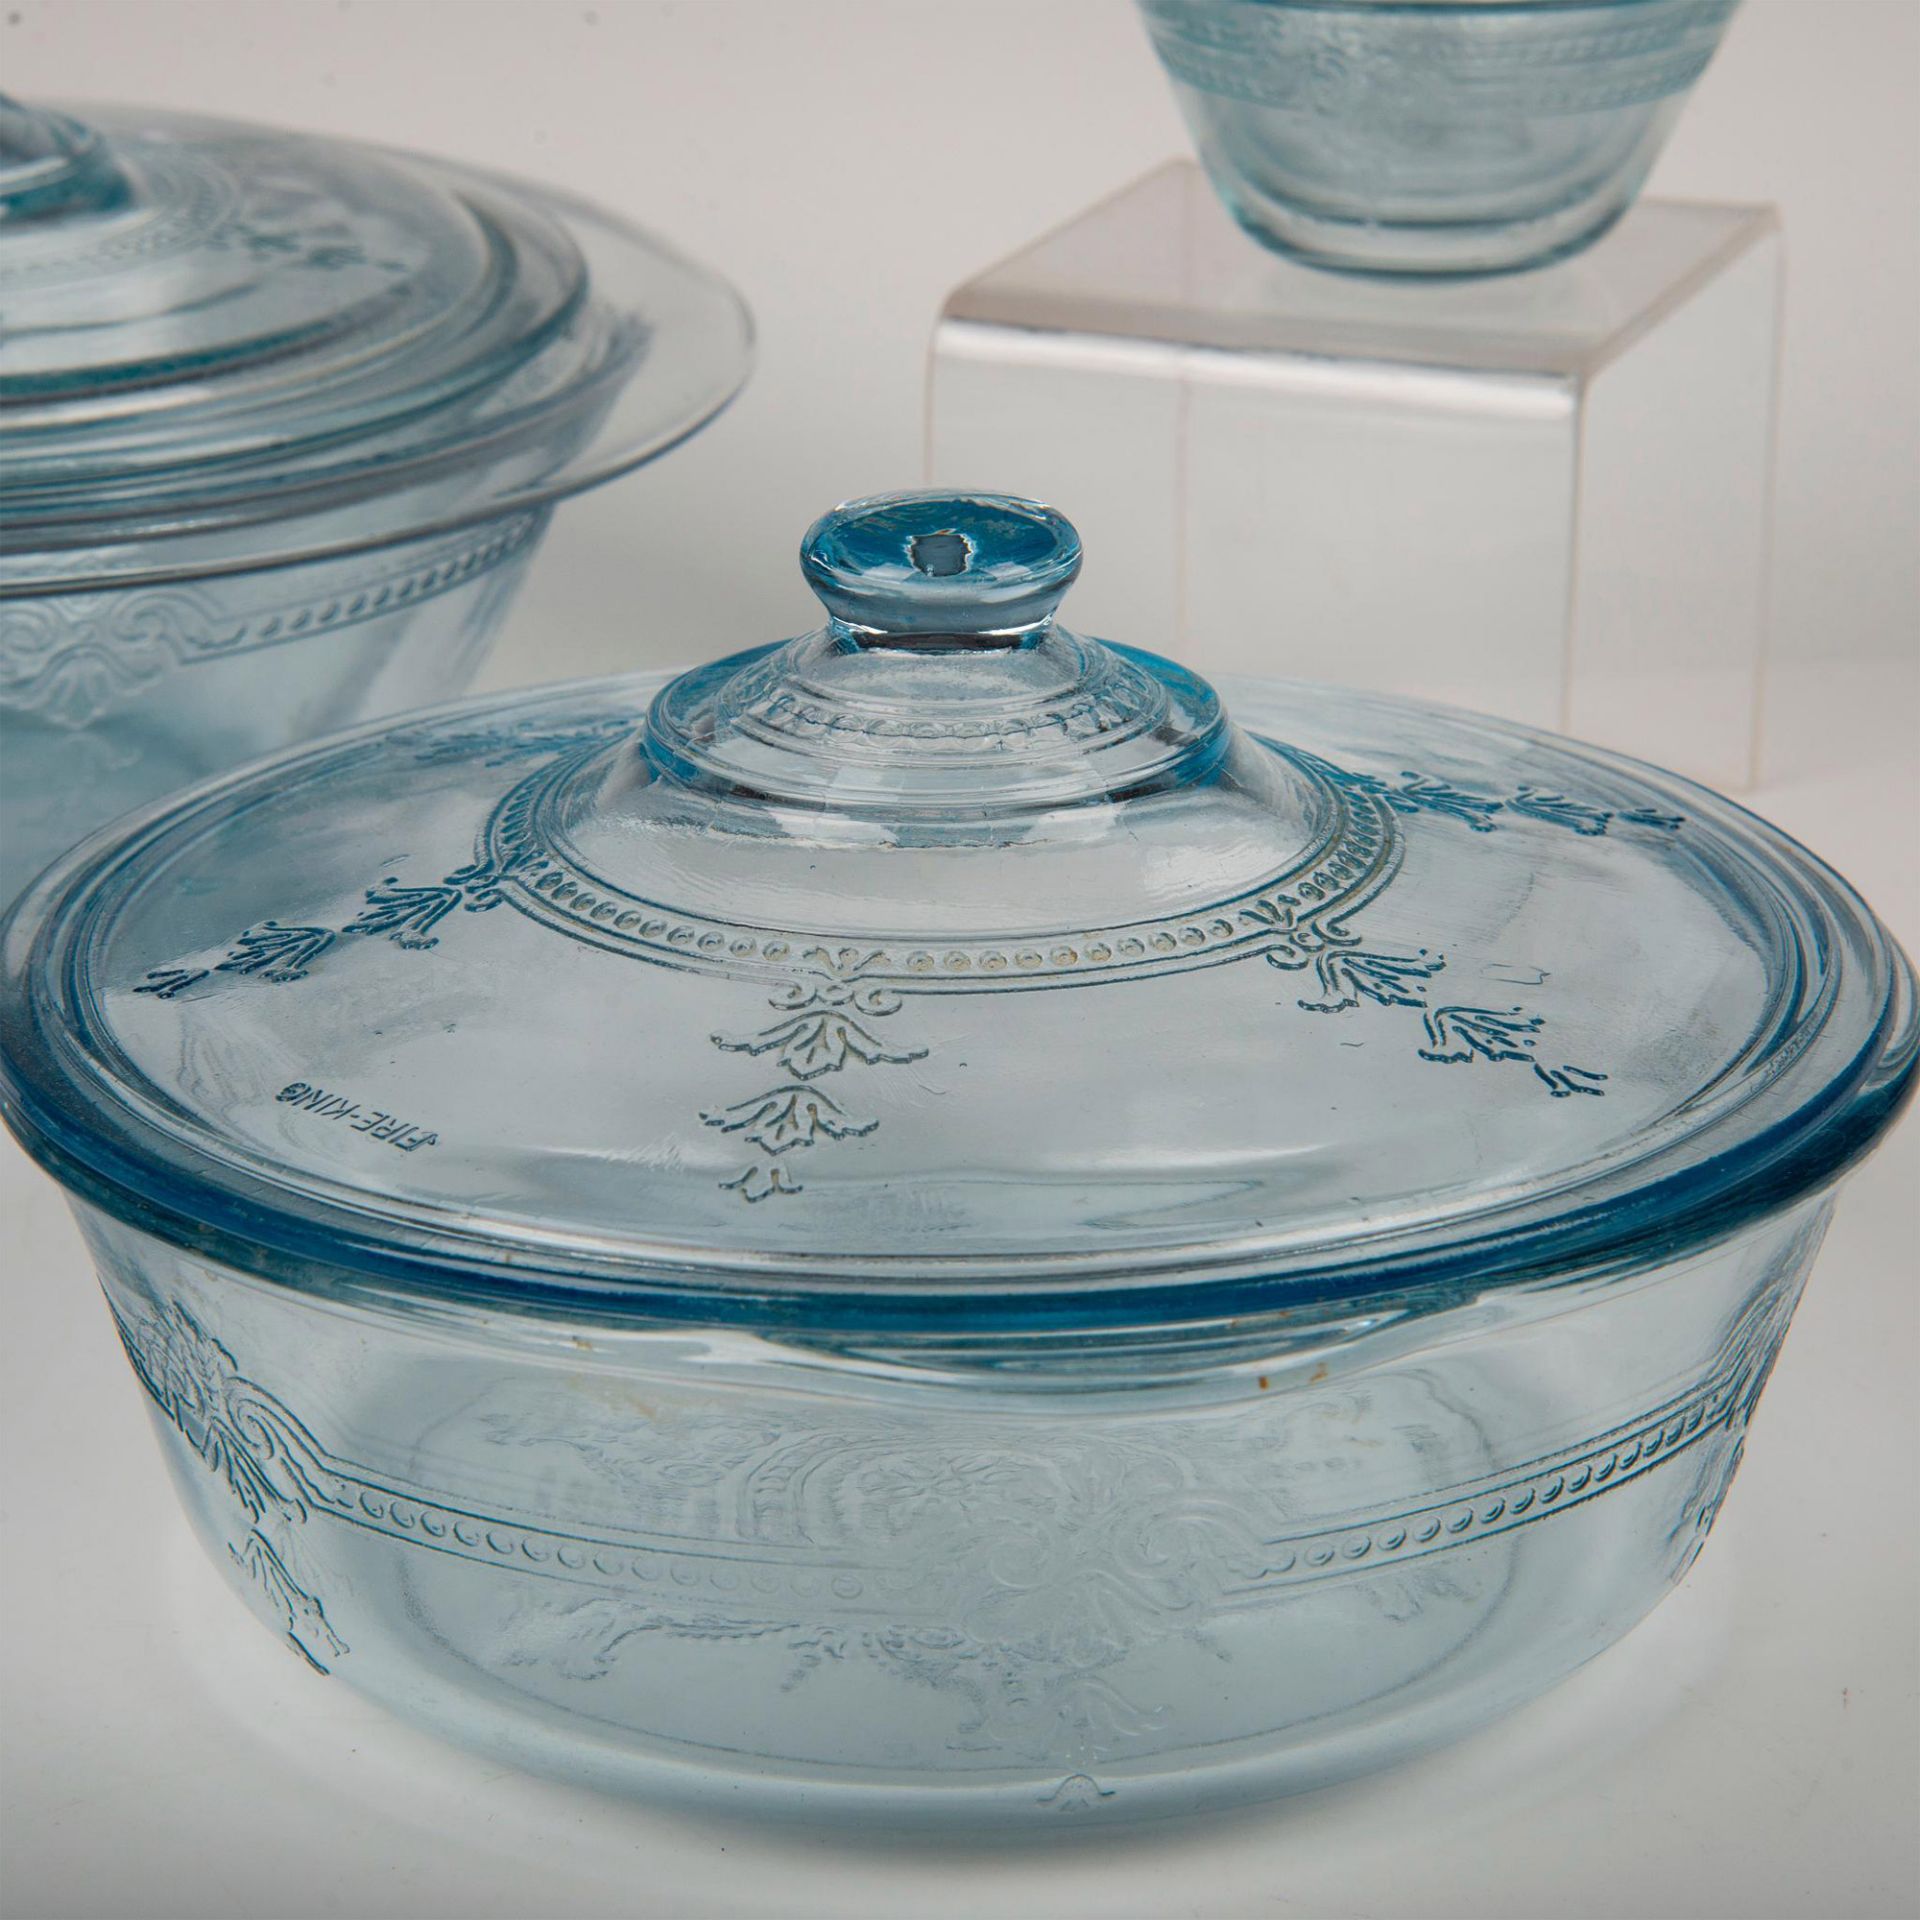 16pc Anchor Hocking Glass Kitchenware, Philbe Sapphire - Image 3 of 8